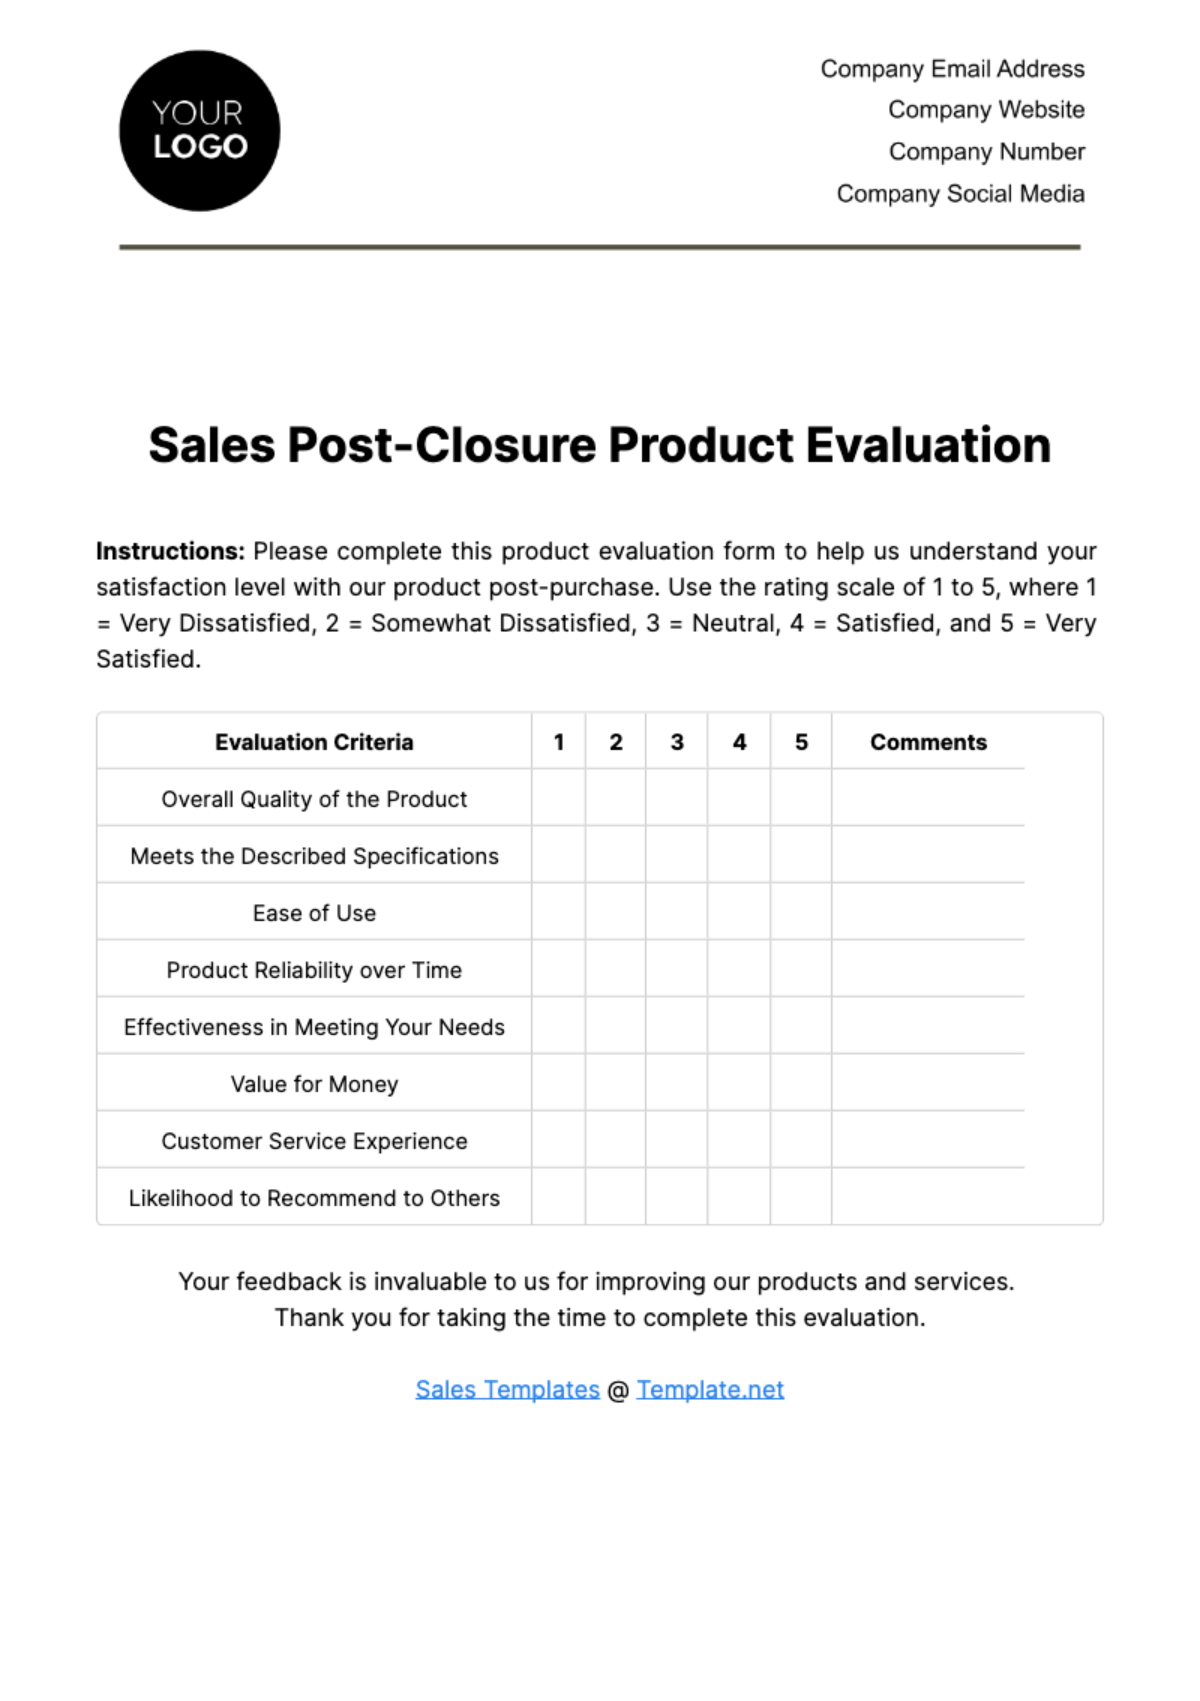 Sales Post-Closure Product Evaluation Template